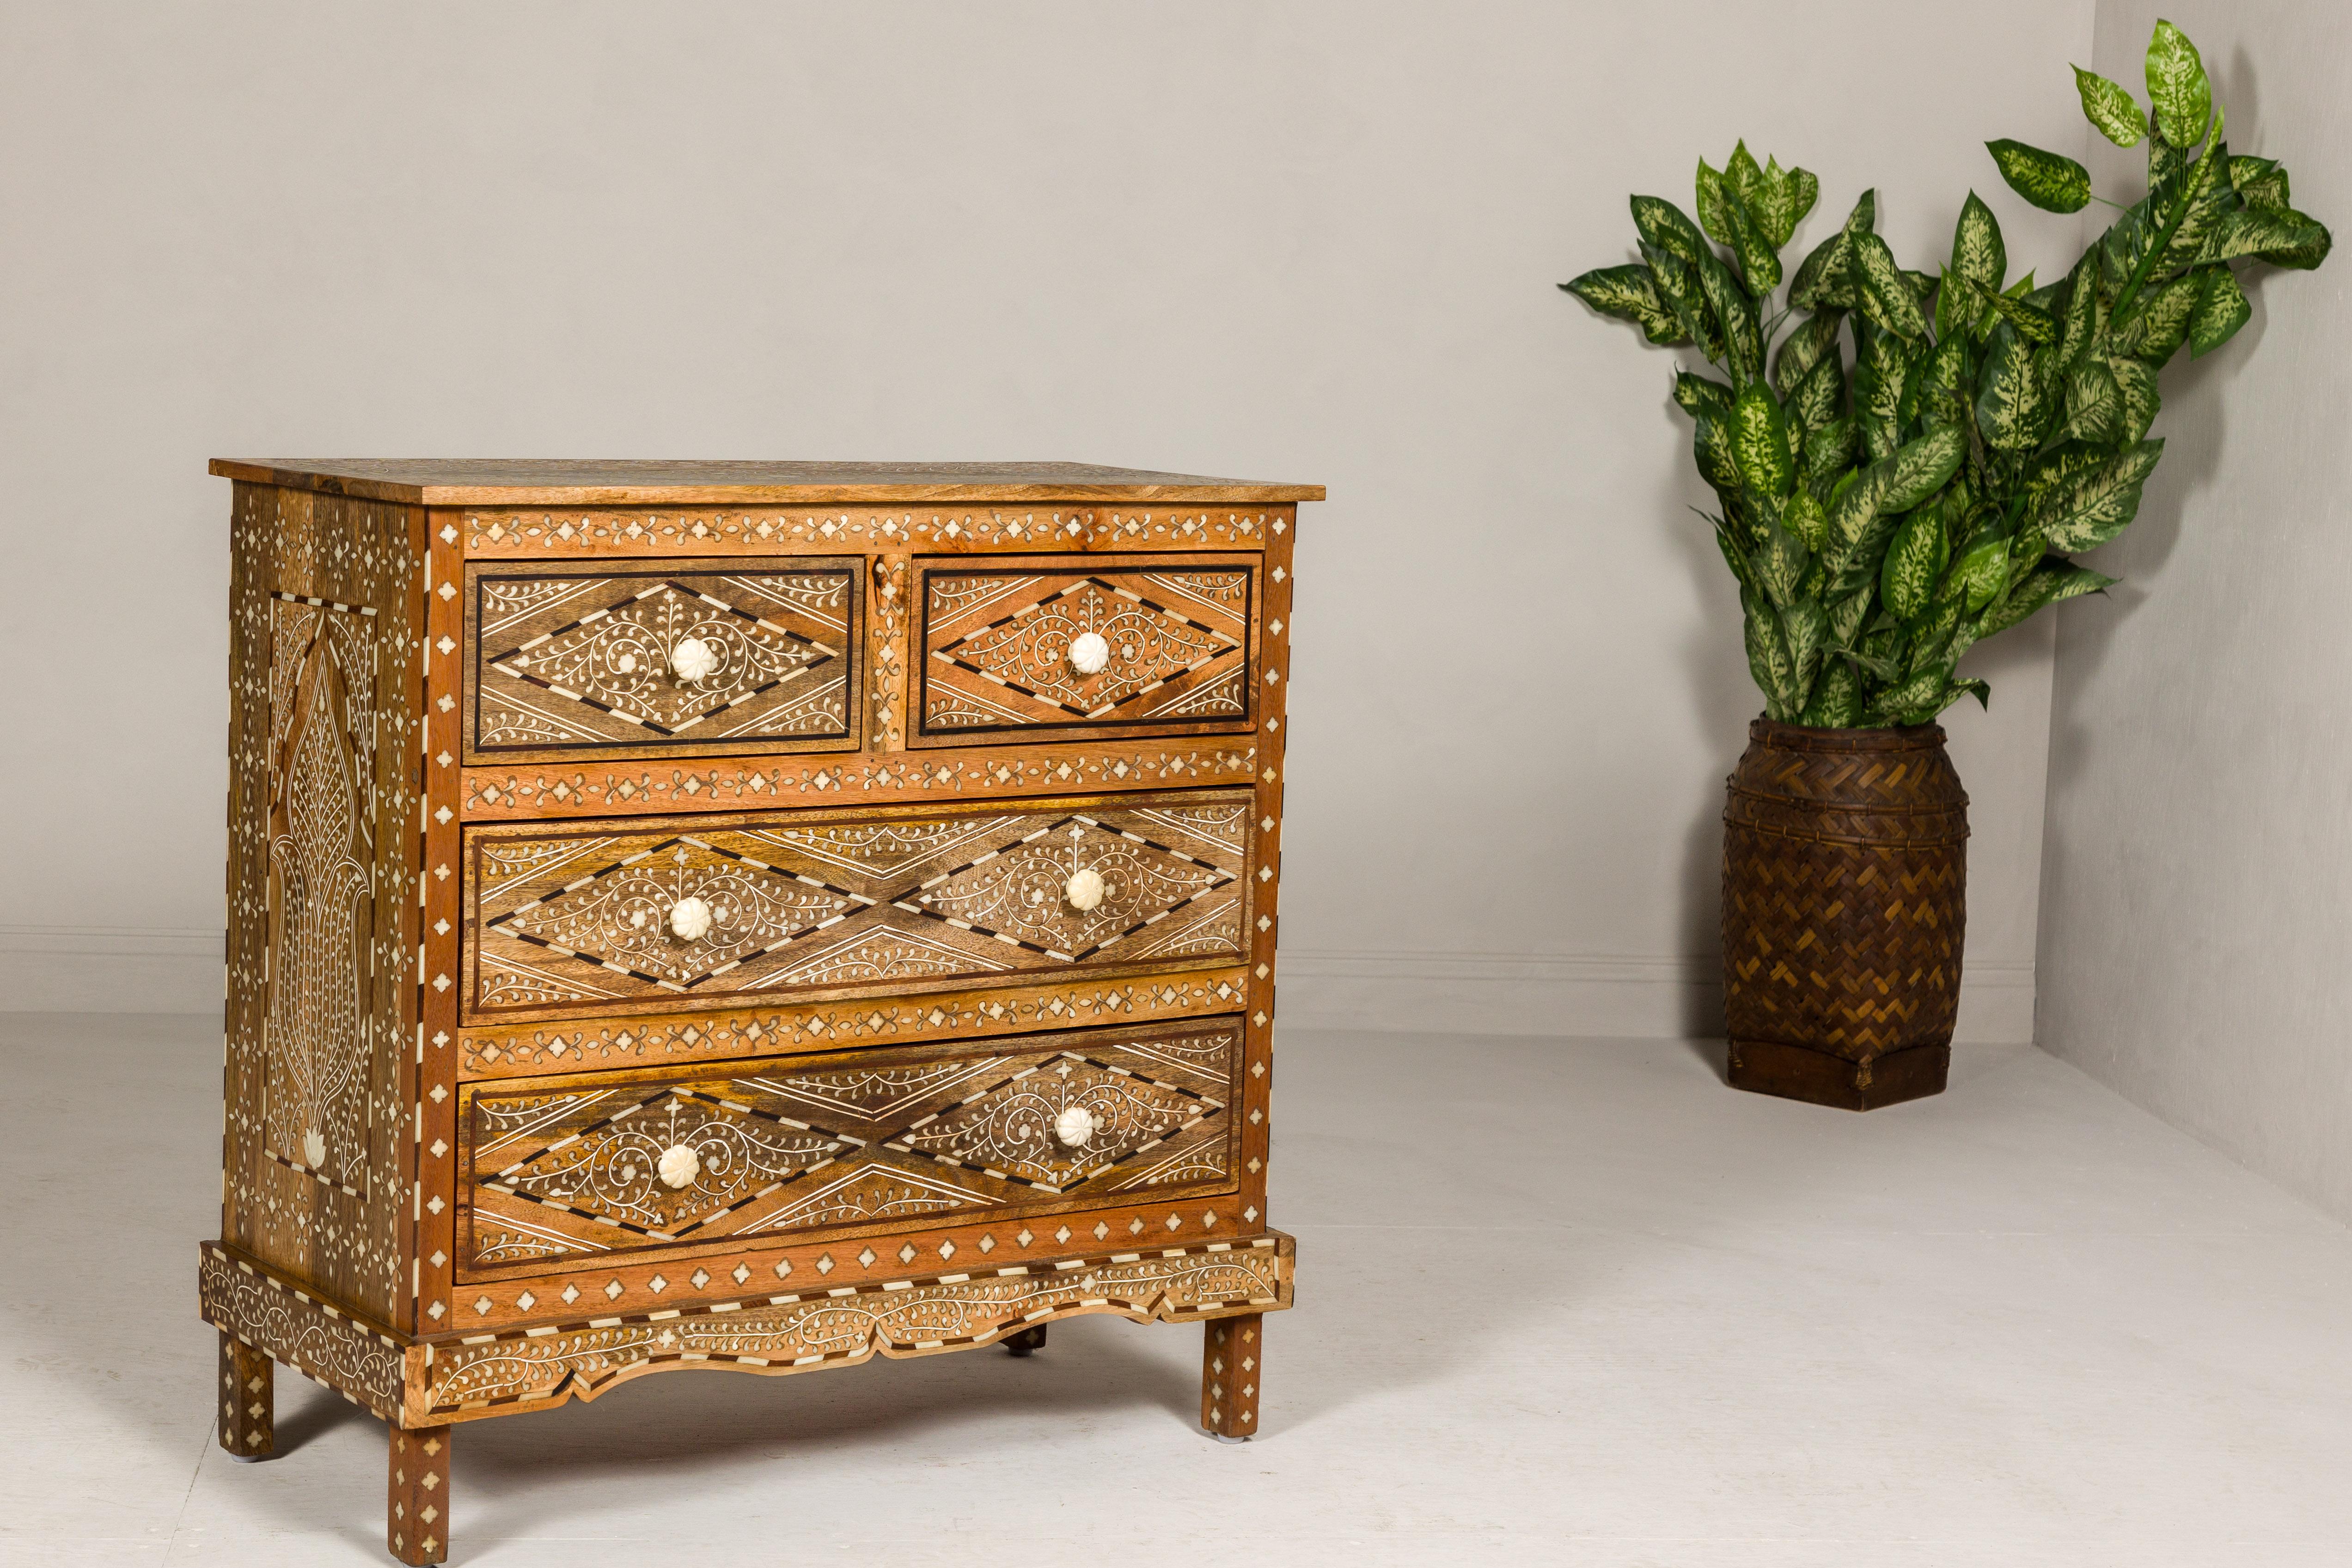 Anglo-Indian Style Mango Wood Four-Drawer Chest with Foliage Themed Bone Inlay For Sale 4